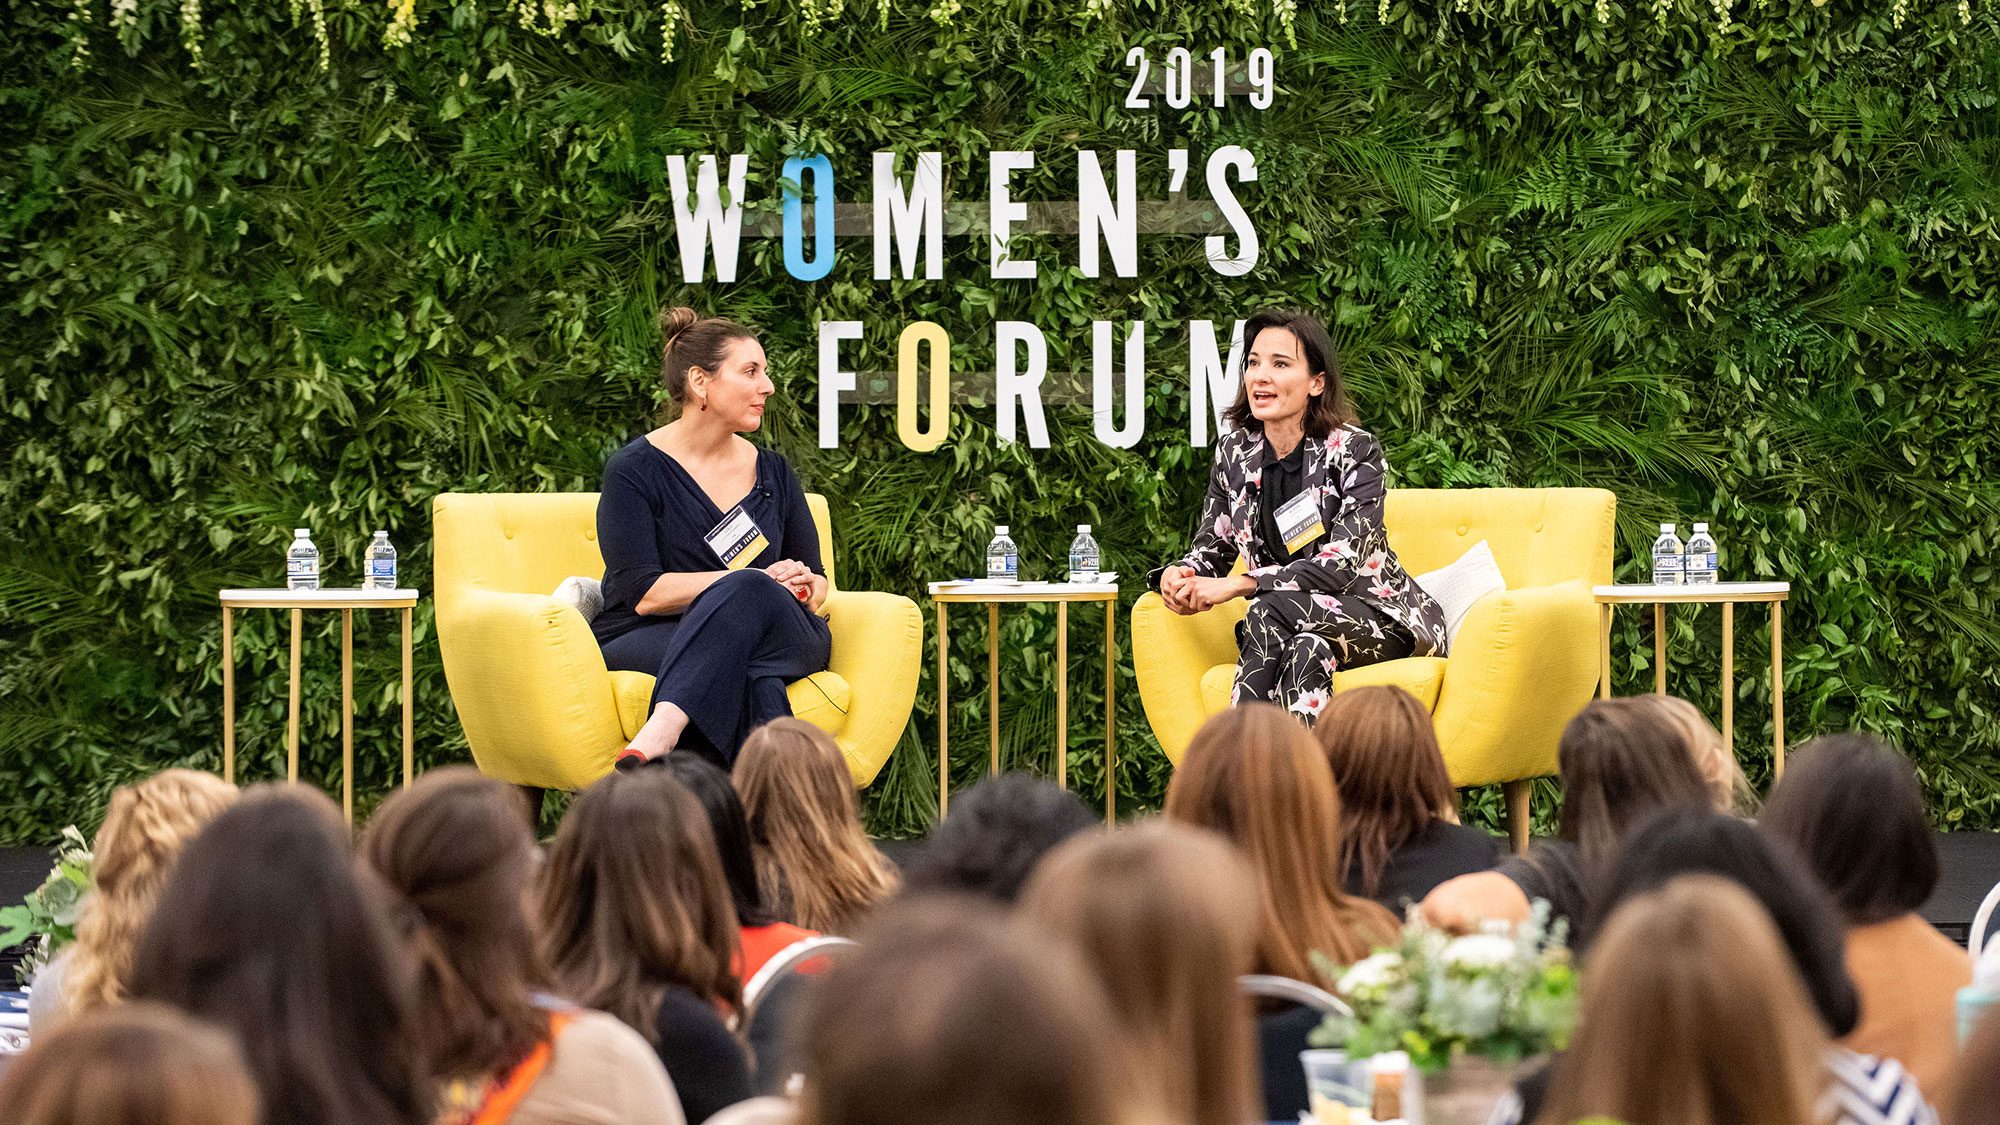 Lulu Garcia-Navarro and Alison Becker sit down on stage and talk with 2019 Women&#039;s Forum signage in the background.